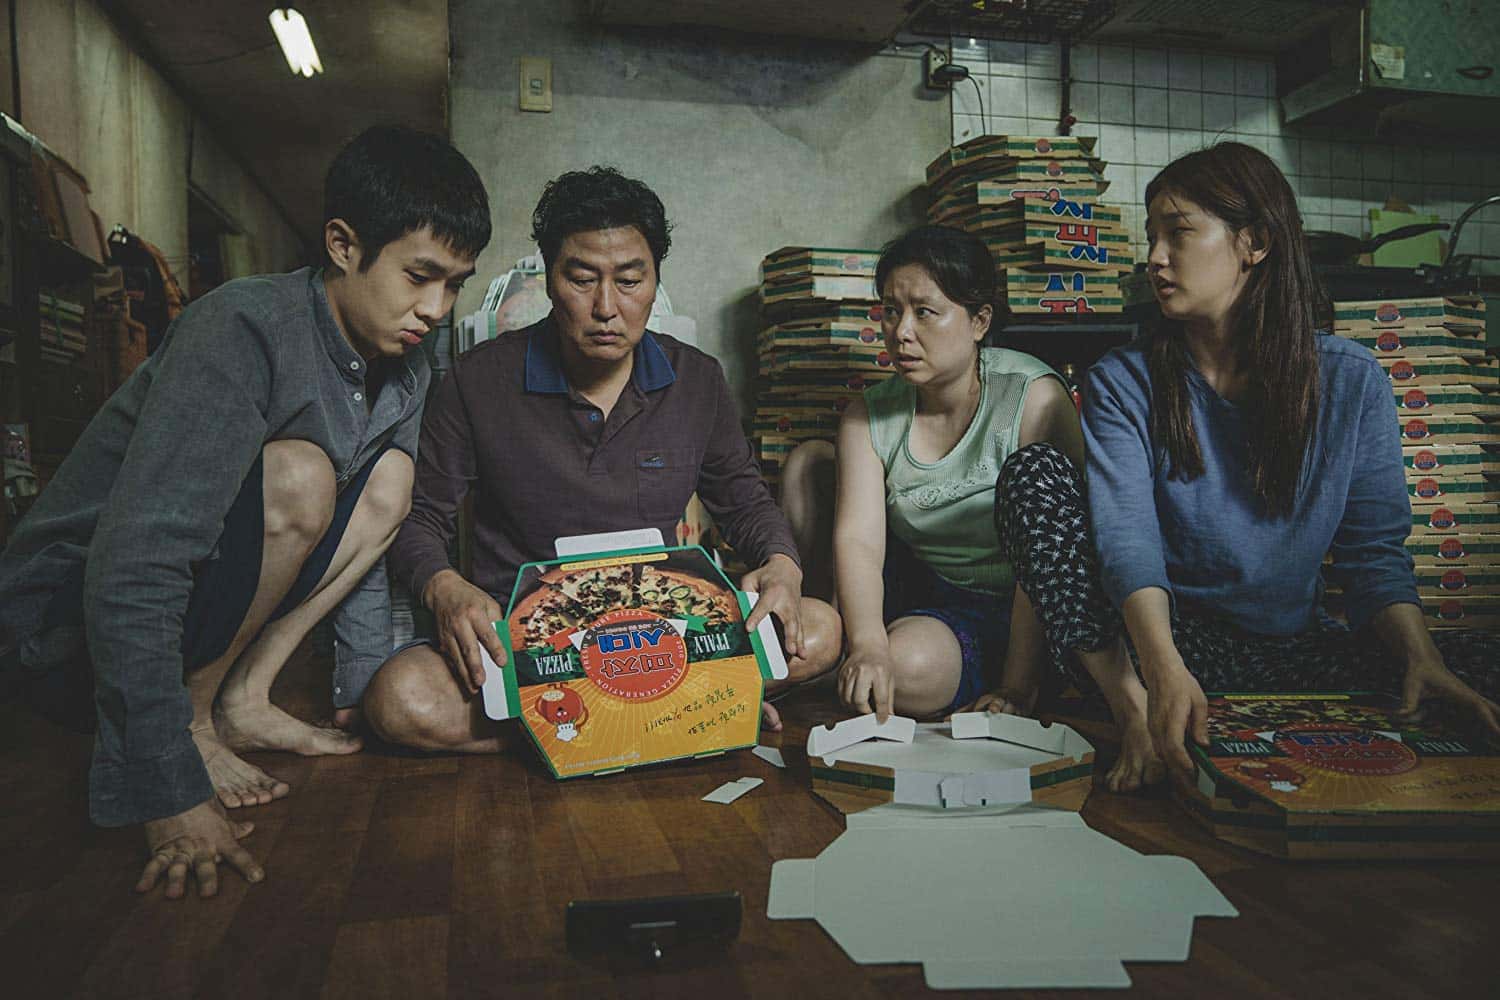 The Kim family sitting on their kitchen floor with piles of freshly folded pizza boxes behind them and more in their hands. They all look exhausted and disheveled.